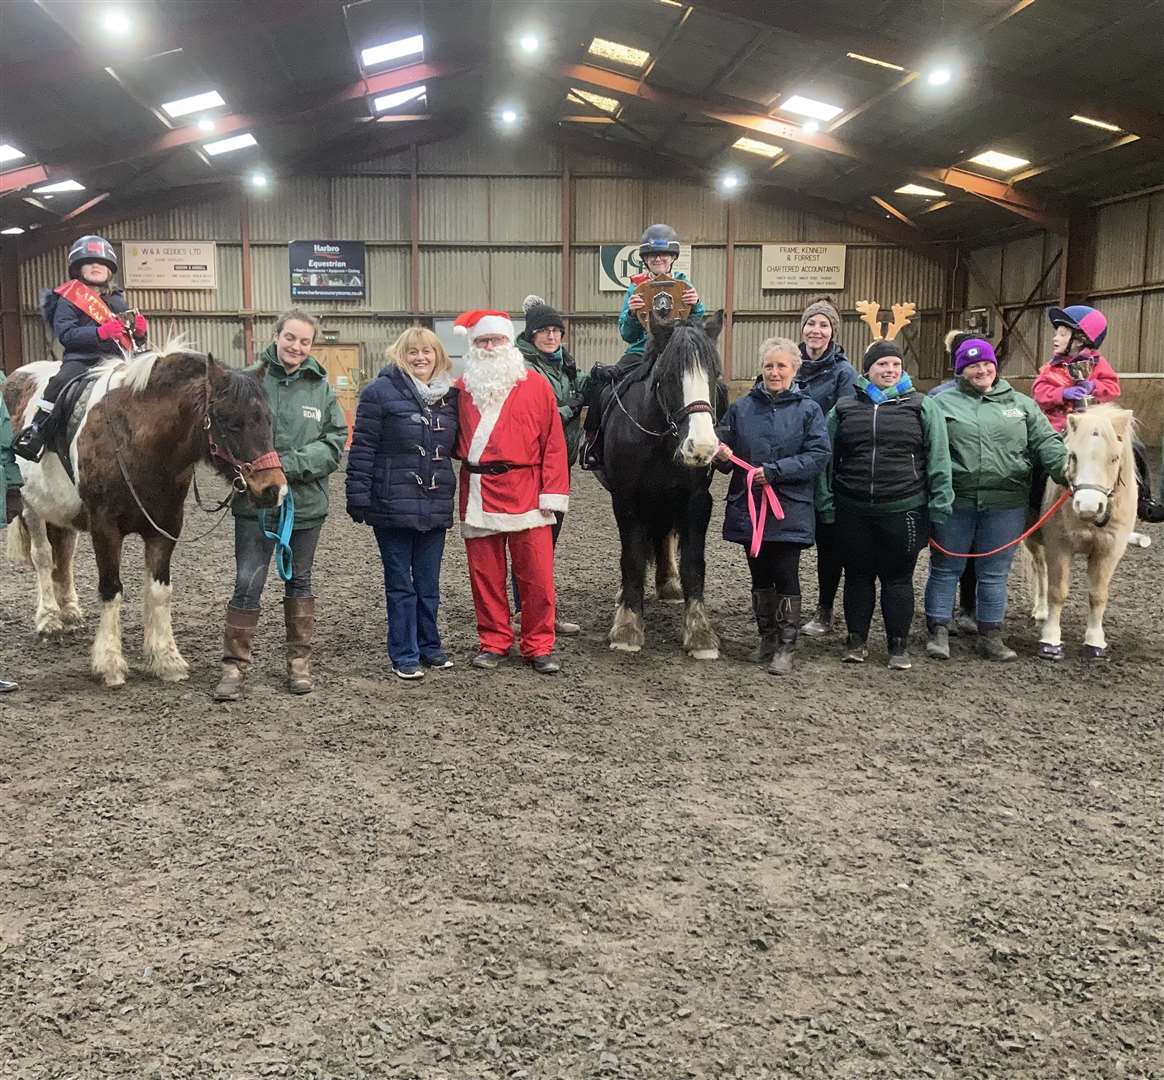 Ride 2 from Noss Primary School line-up to meet Santa along with some of the RDA volunteers.